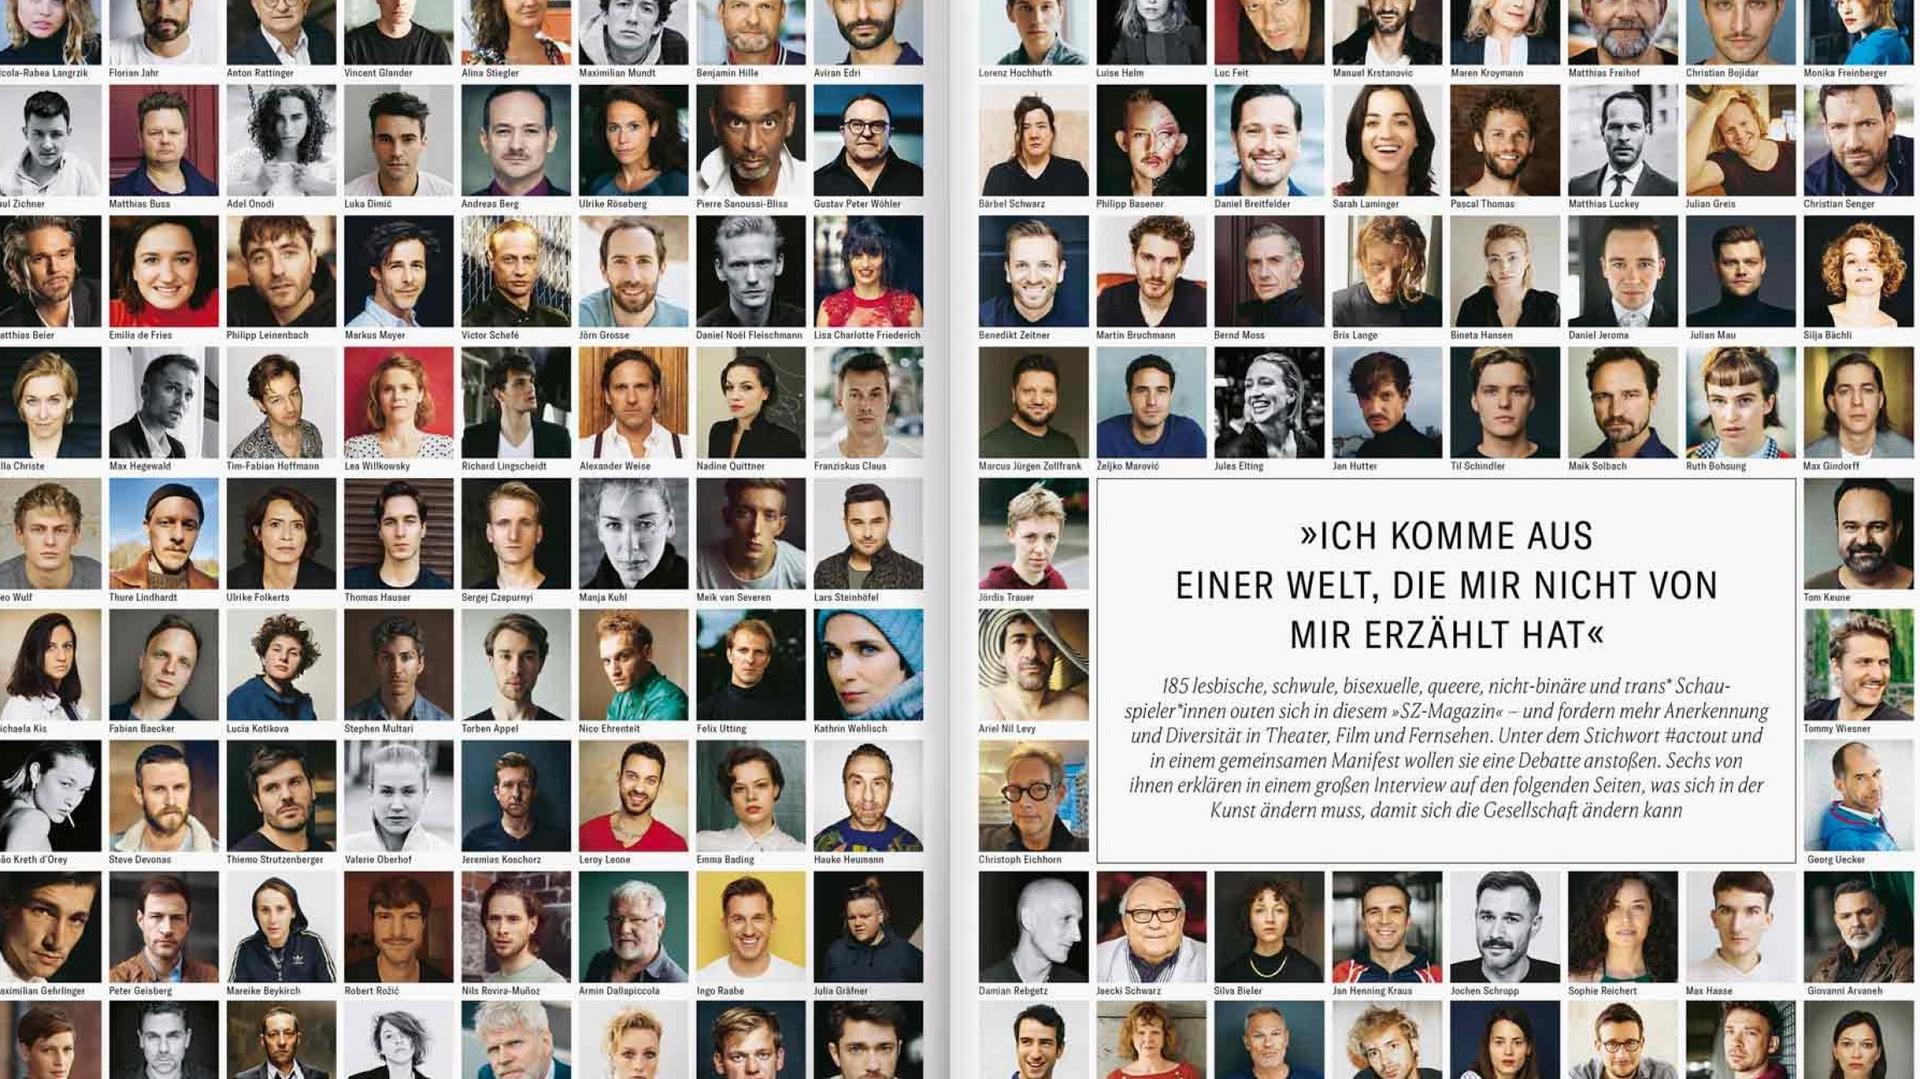 On the front page of Süddeutsche Zeitung Magazin, one of Germany's largest publications, 185 actors have come out as LGBTQ. 